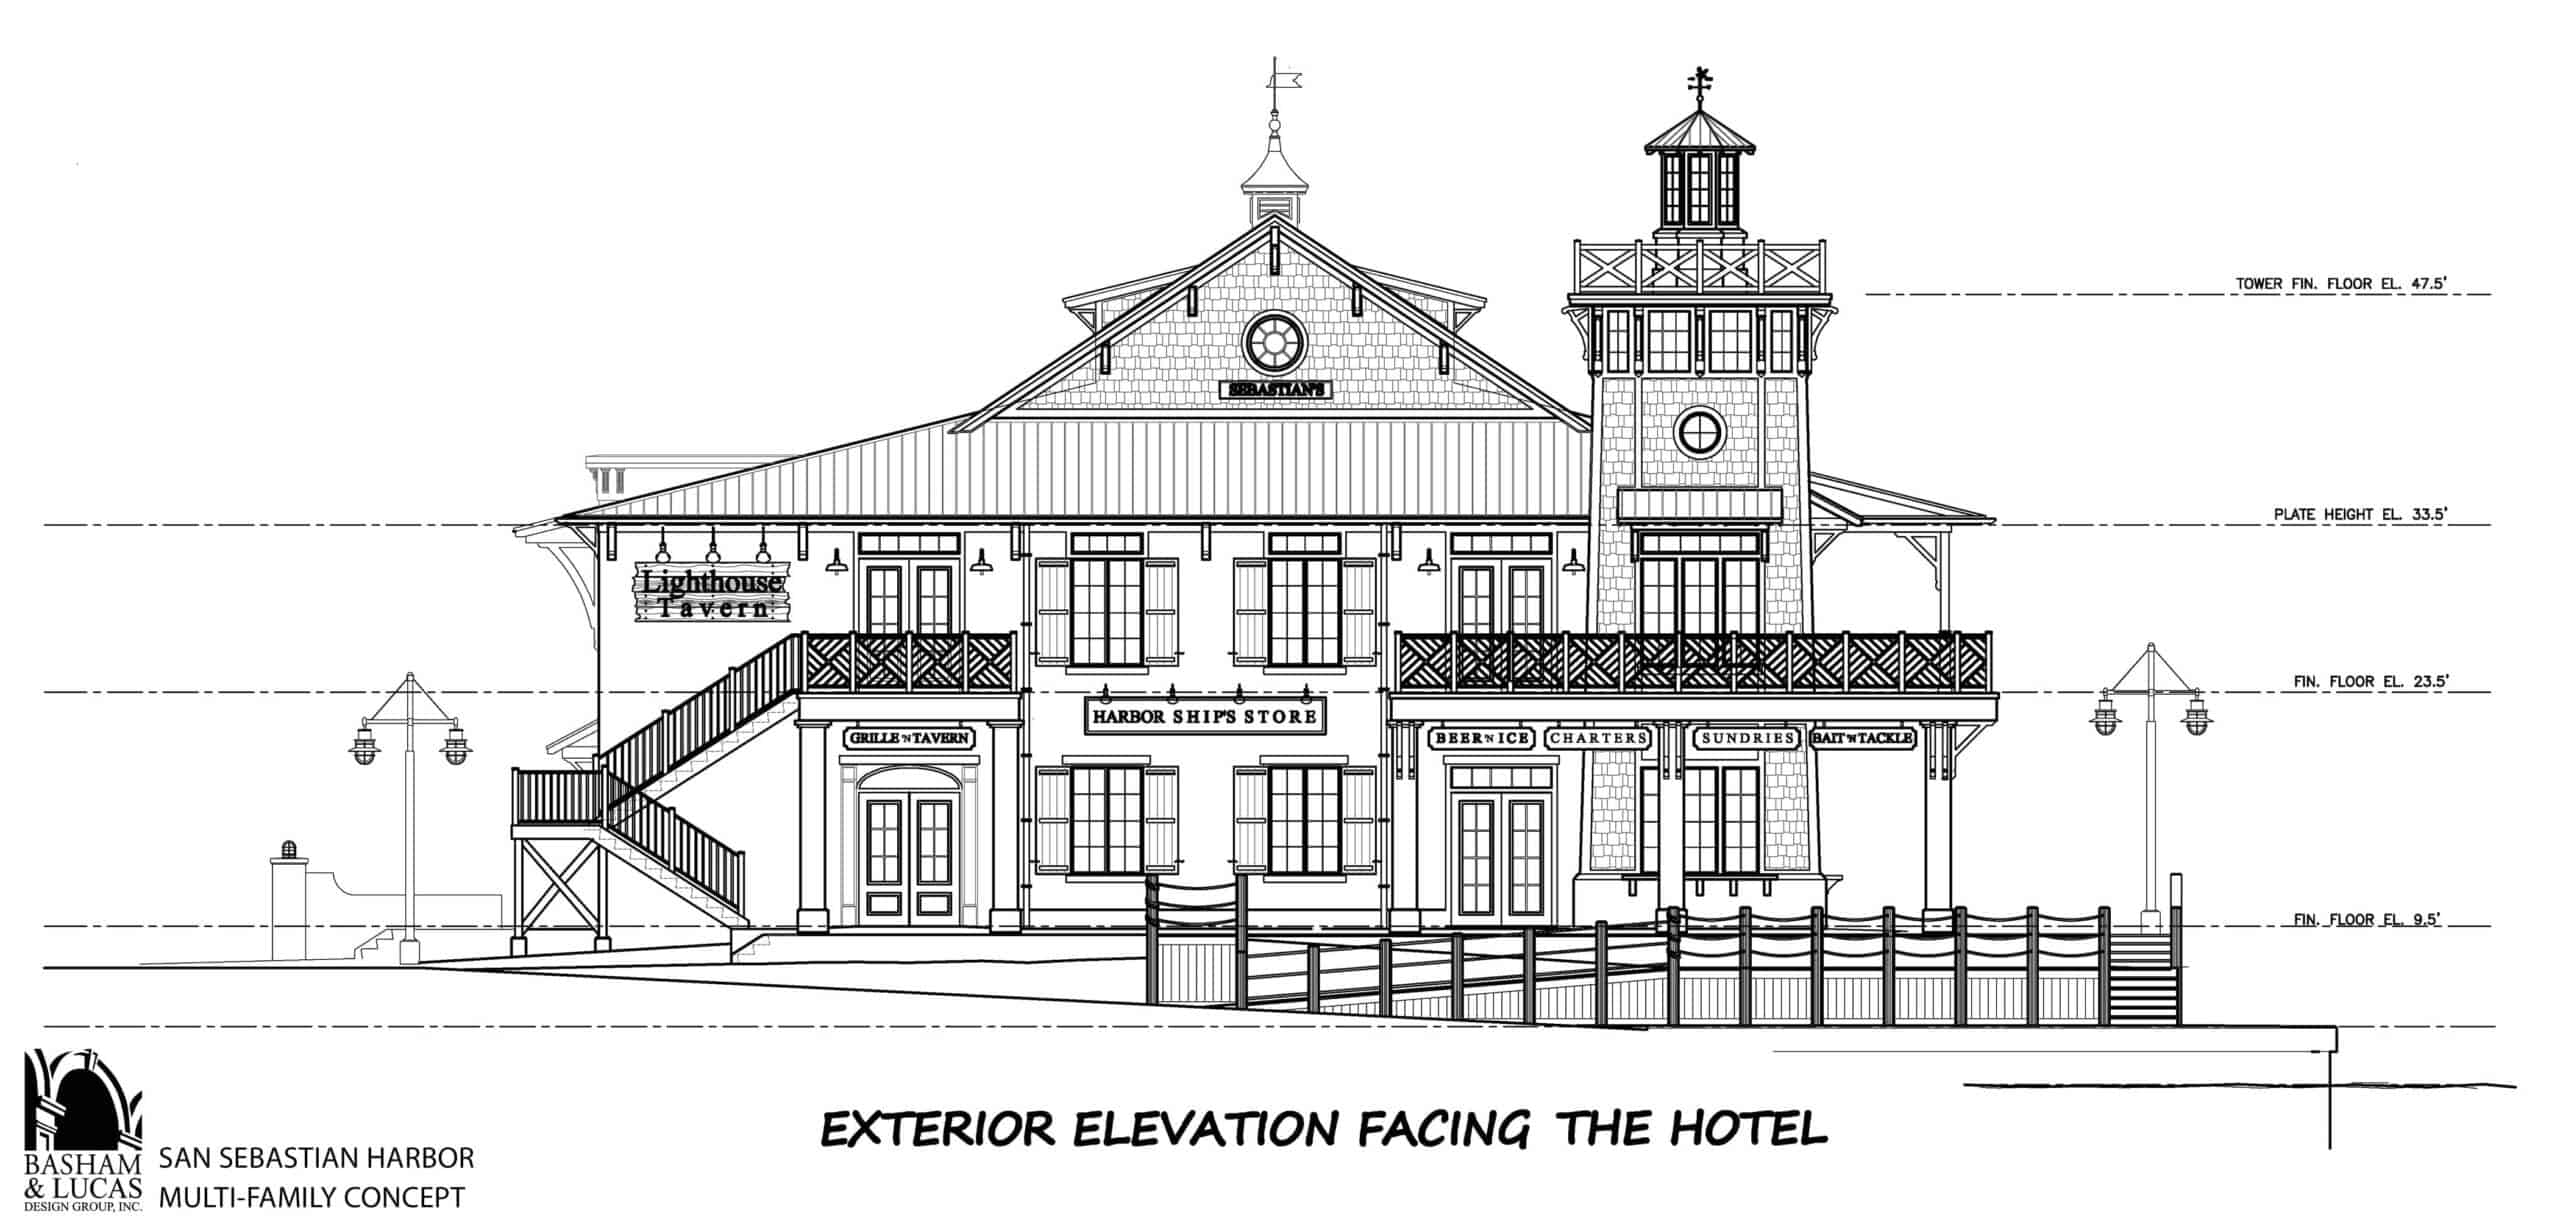 Ship Store Elevation